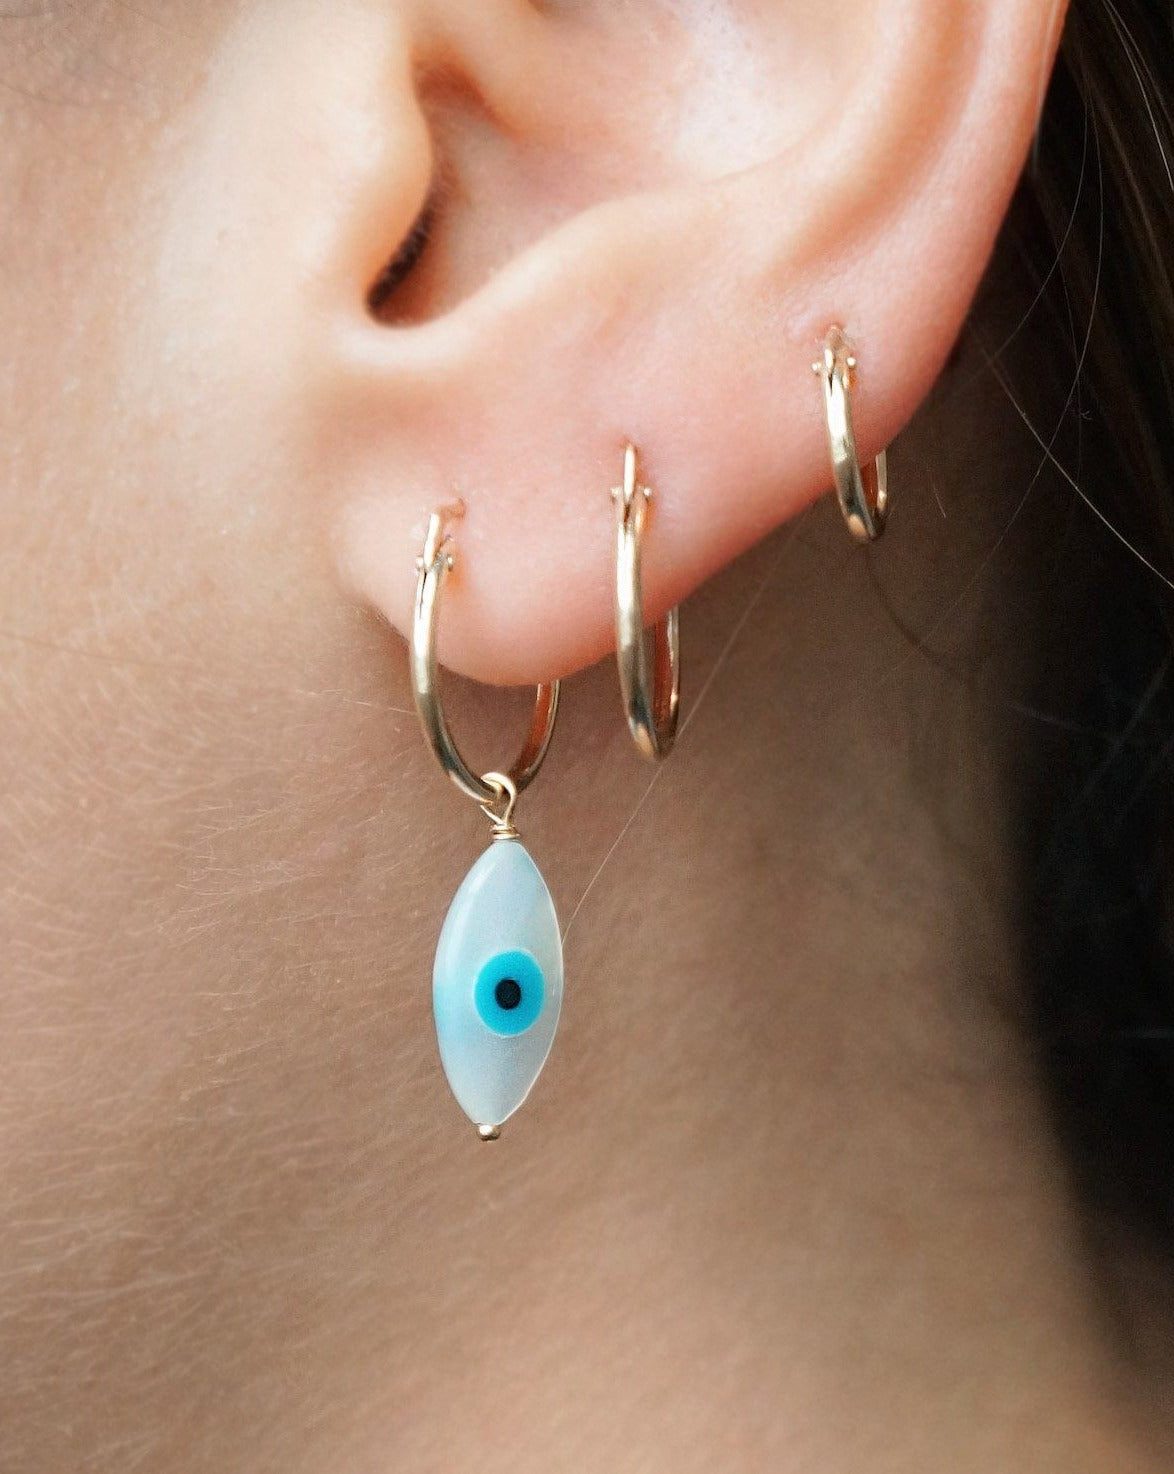 Ima Hoop Earrings by KOZAKH. 15mm snap closure hoop earrings, crafted in 14K Gold Filled, featuring hand carved Mother of Pearl Evil Eye charm.